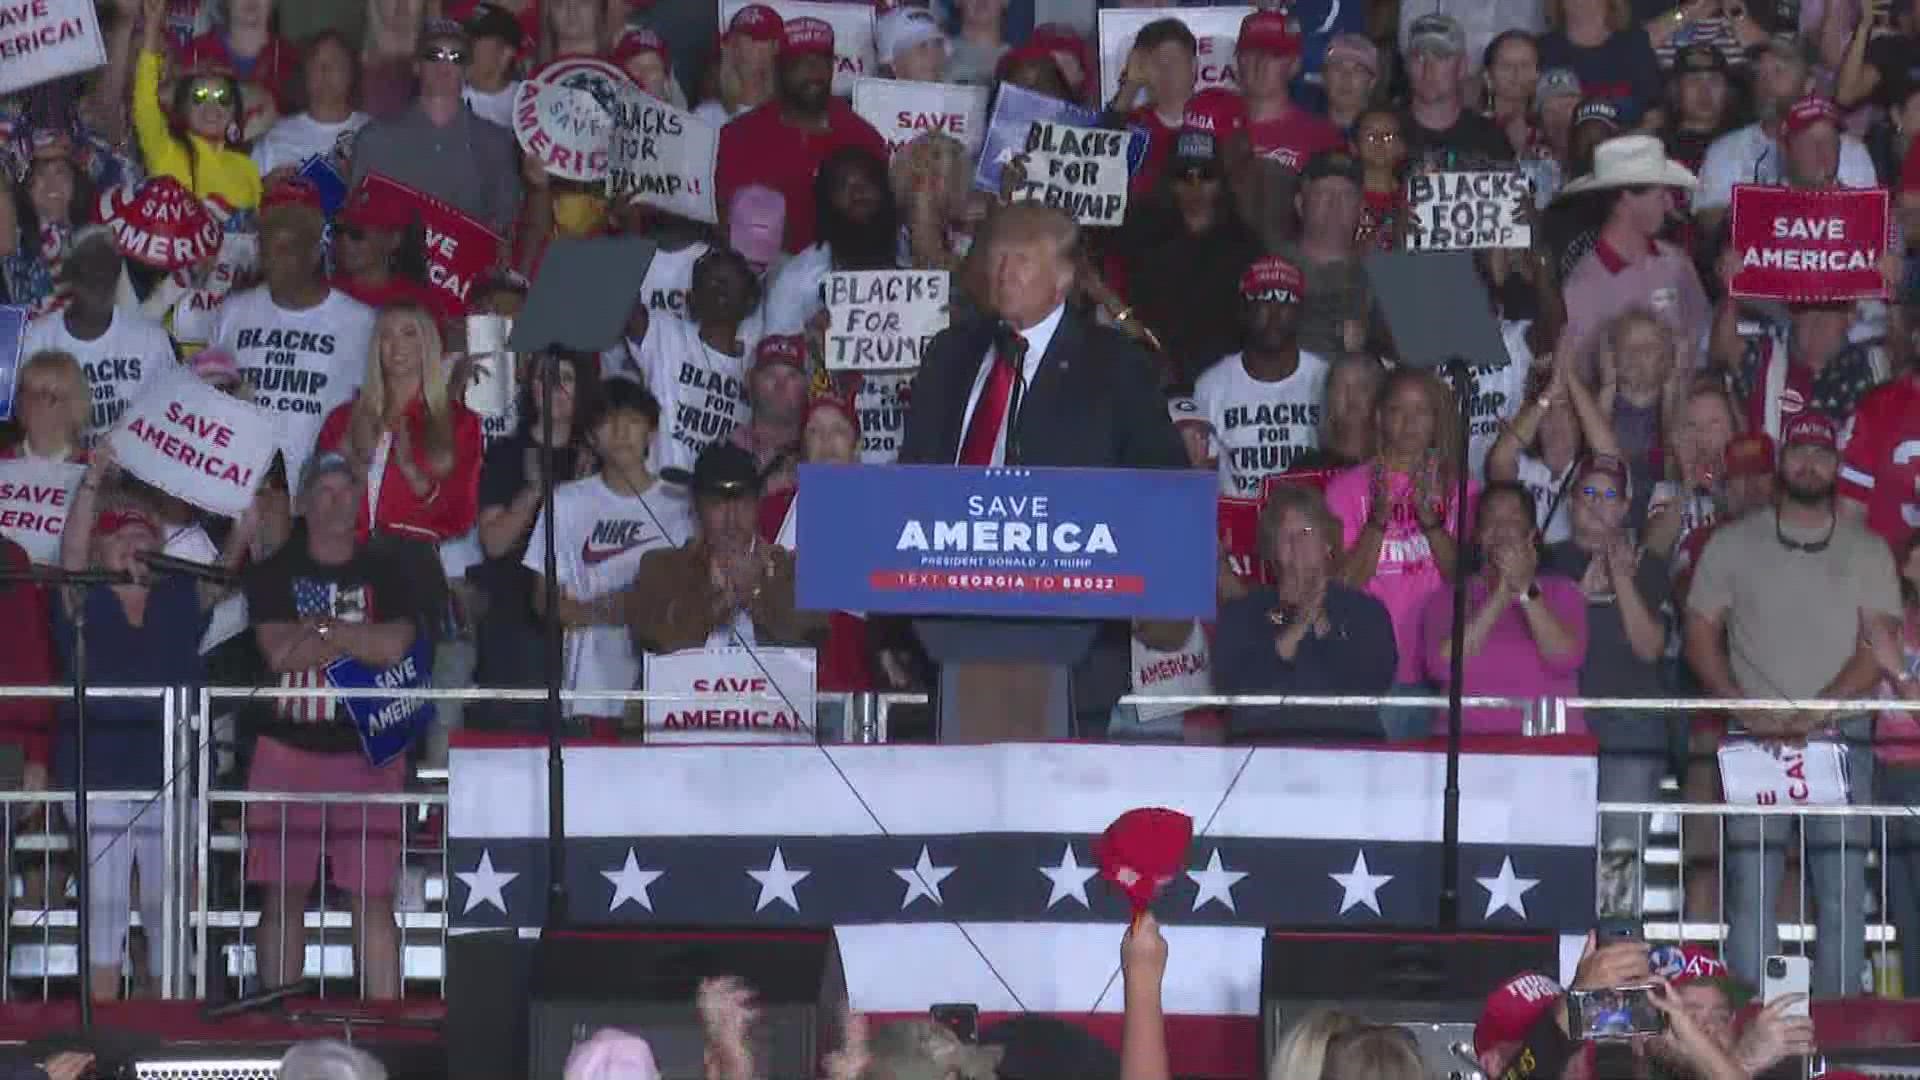 Donald Trump was the final speaker of the night at the Save America rally in Perry. This is the conclusion of his speech.